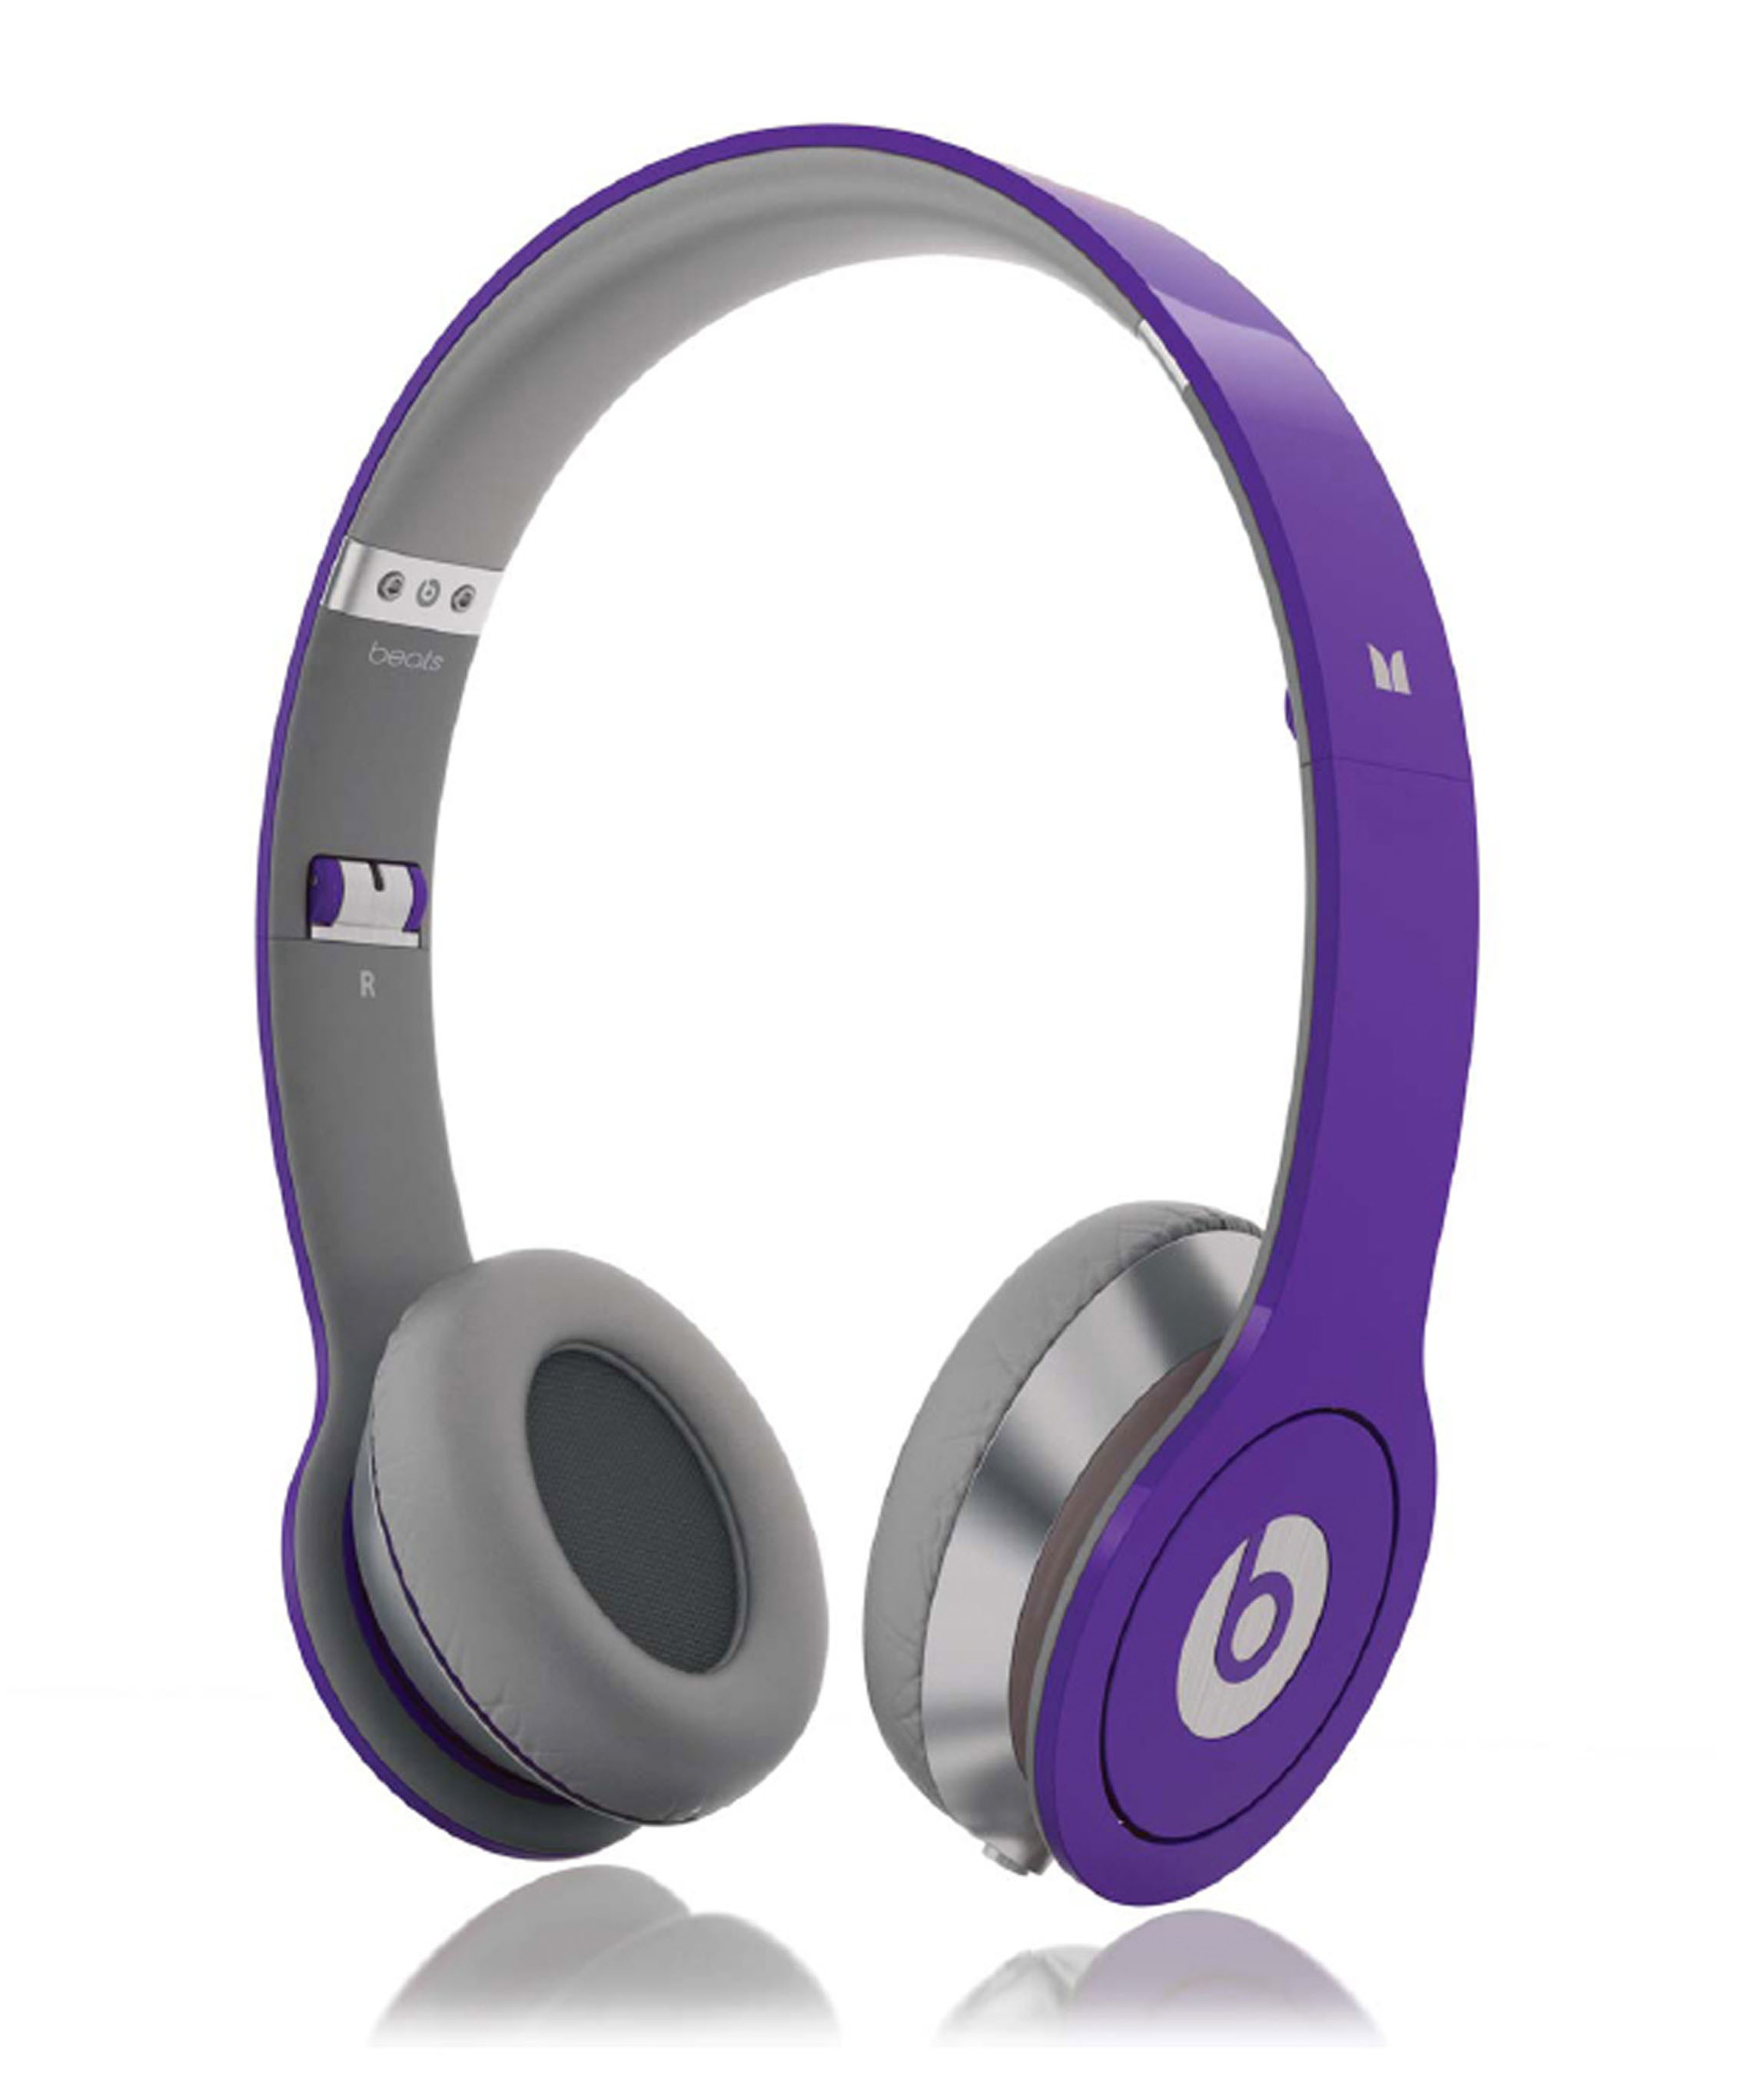 New Headphones 'Justbeats™' Exclusively at Best Buy® 'Just' in for the Holidays